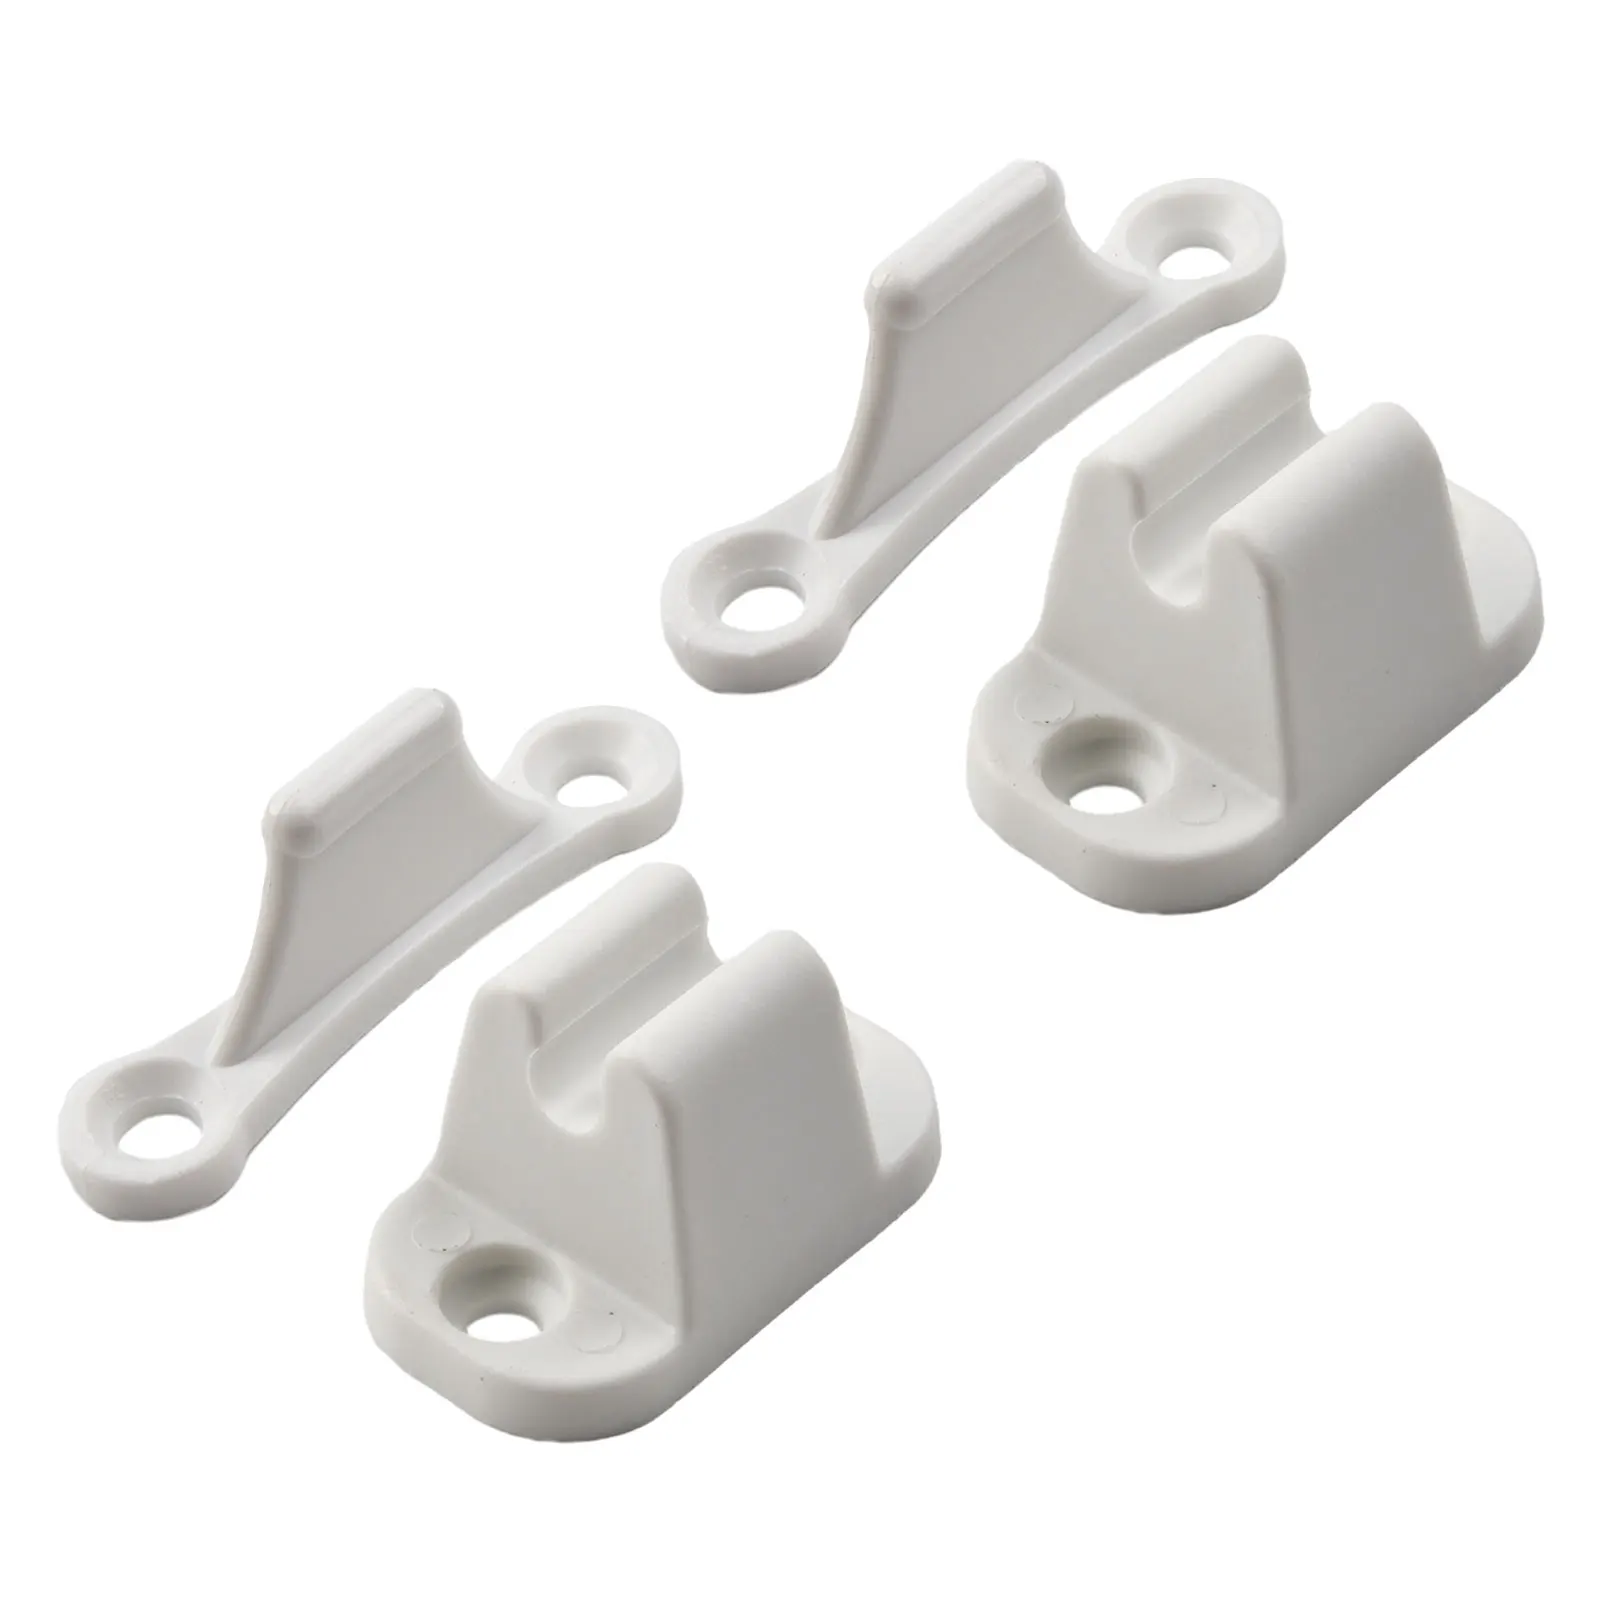 Brand New Door Retainer Catch Door Catch Female Section Male Section Nylon Shocks And Noise White Color 2pcs Elddis 2pcs 1 4 bsp male thread air compressor hose quick coupler plugs sockets connector fitting euro quick connect release fittings